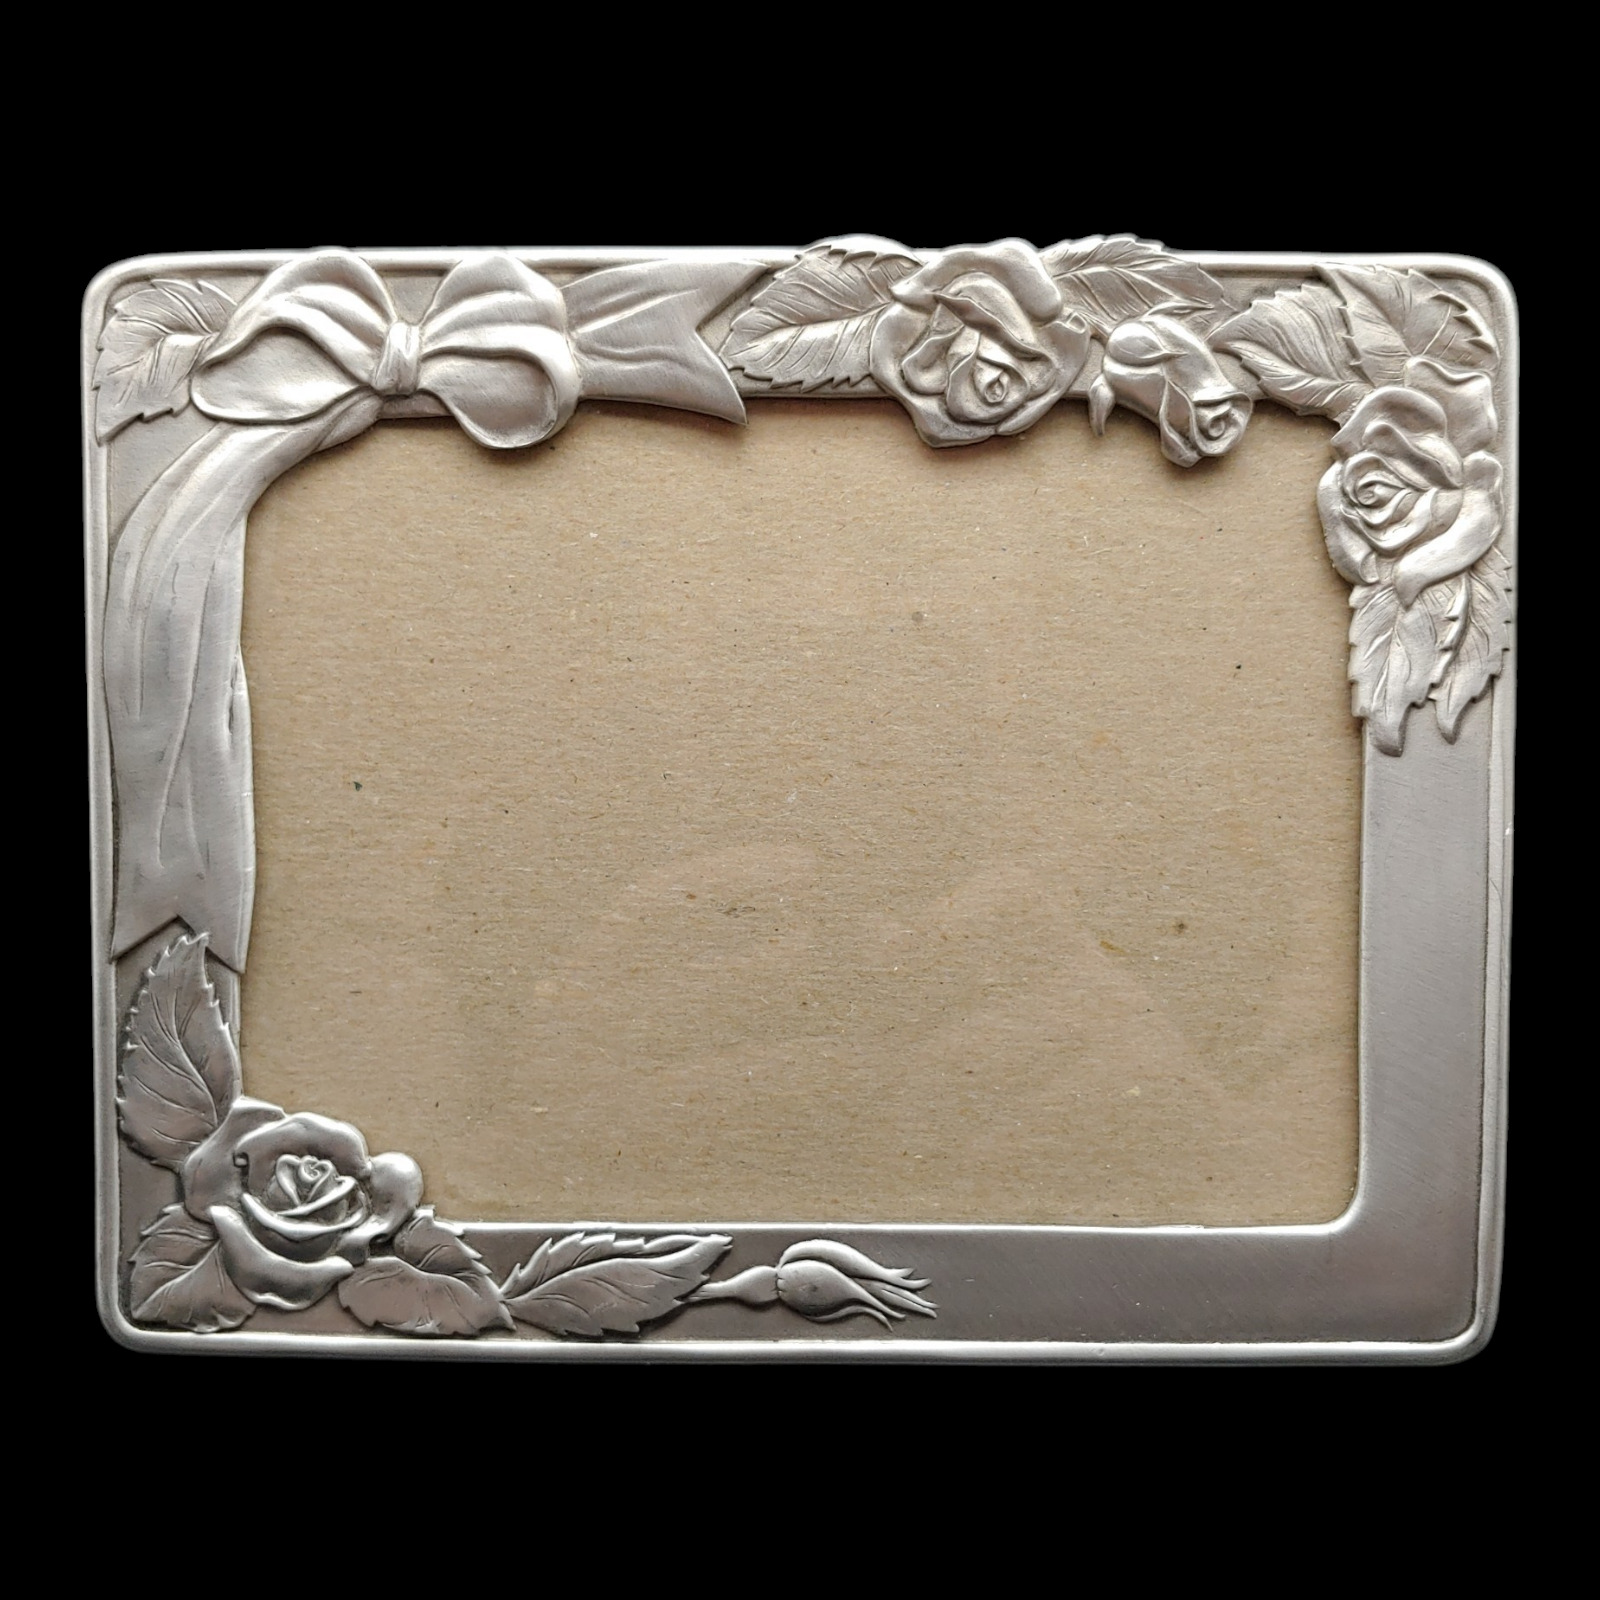 Seagull Pewter Photo Picture Frame, 5x7 vtg 1990s Silver Gray Rose Flower Floral